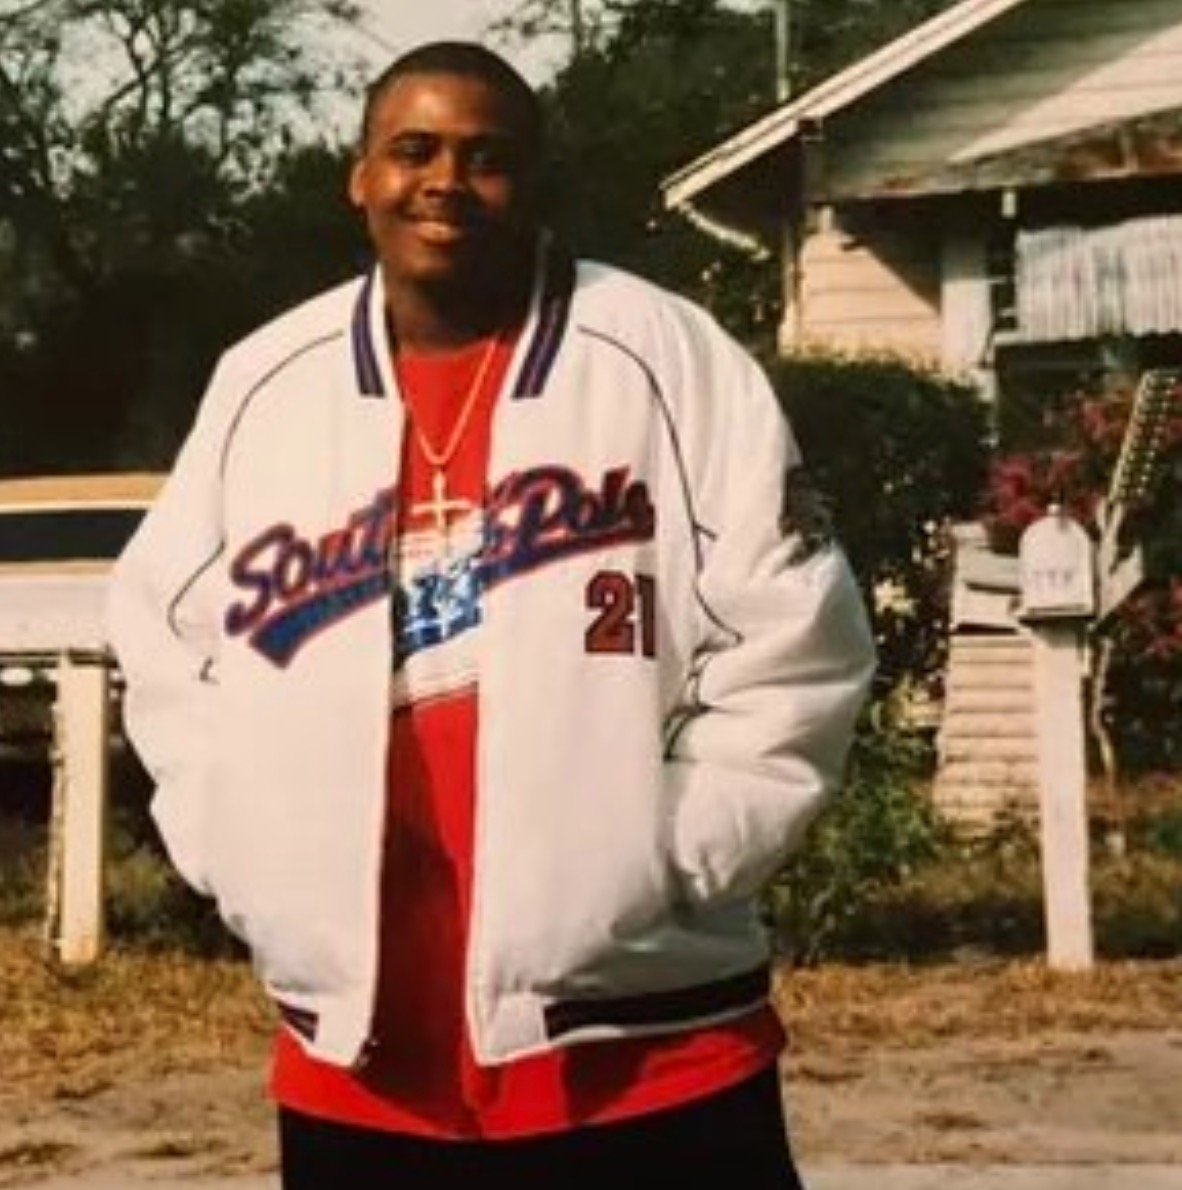 A Family Is Demanding Answers After a Prisoner Died After Only 3 Months in Prison | A family is looking for answers after they believe their loved one died a horrific death while being held in a dirty jail cell in Atlanta, Georgia.